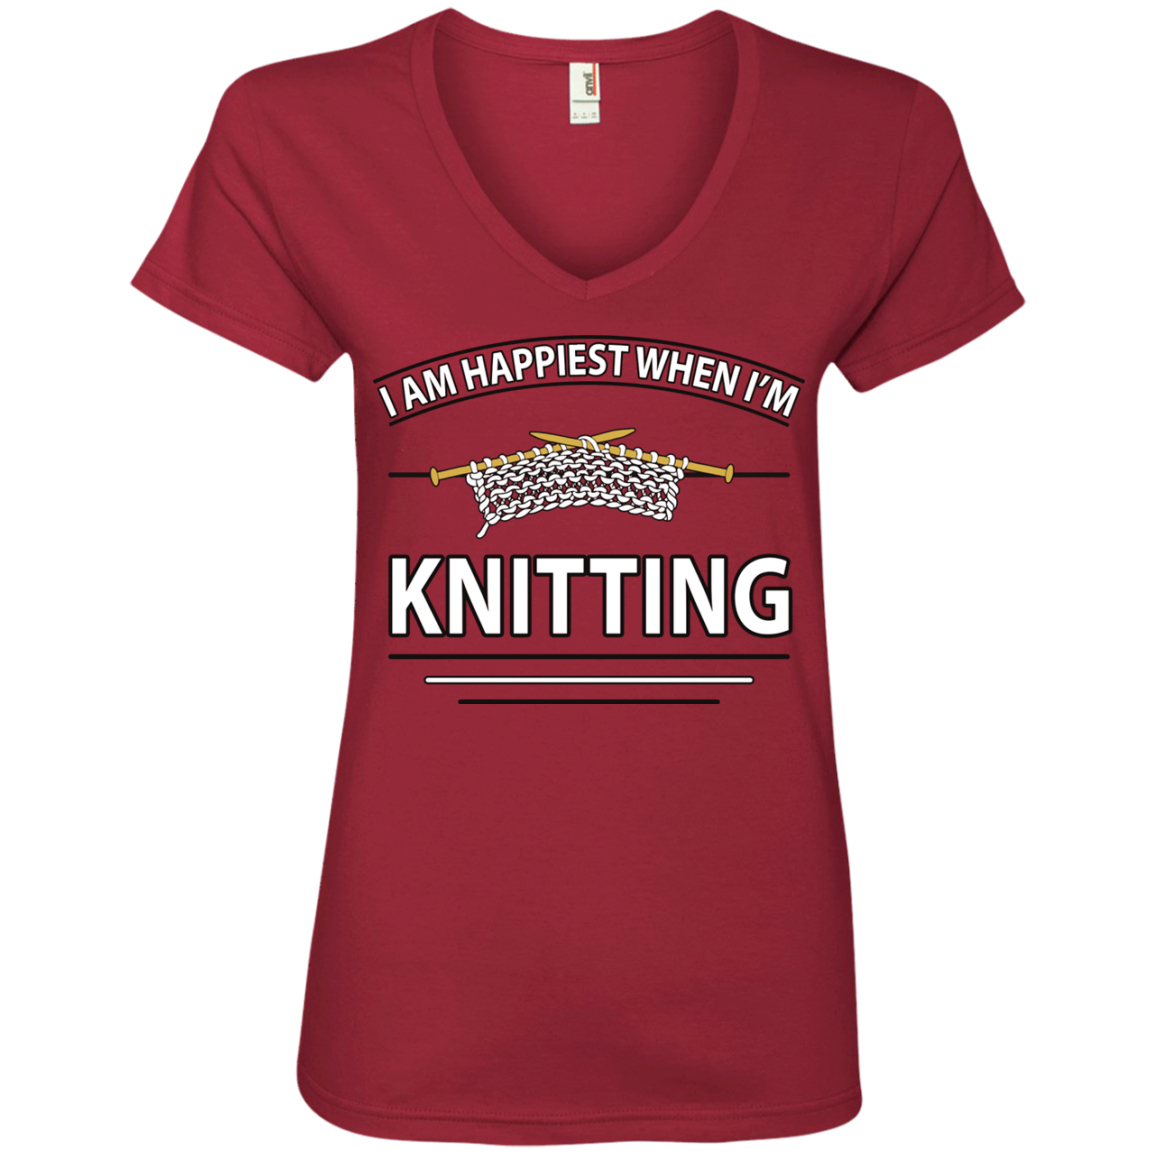 I Am Happiest When I'm Knitting Ladies V-neck Tee - Crafter4Life - 4